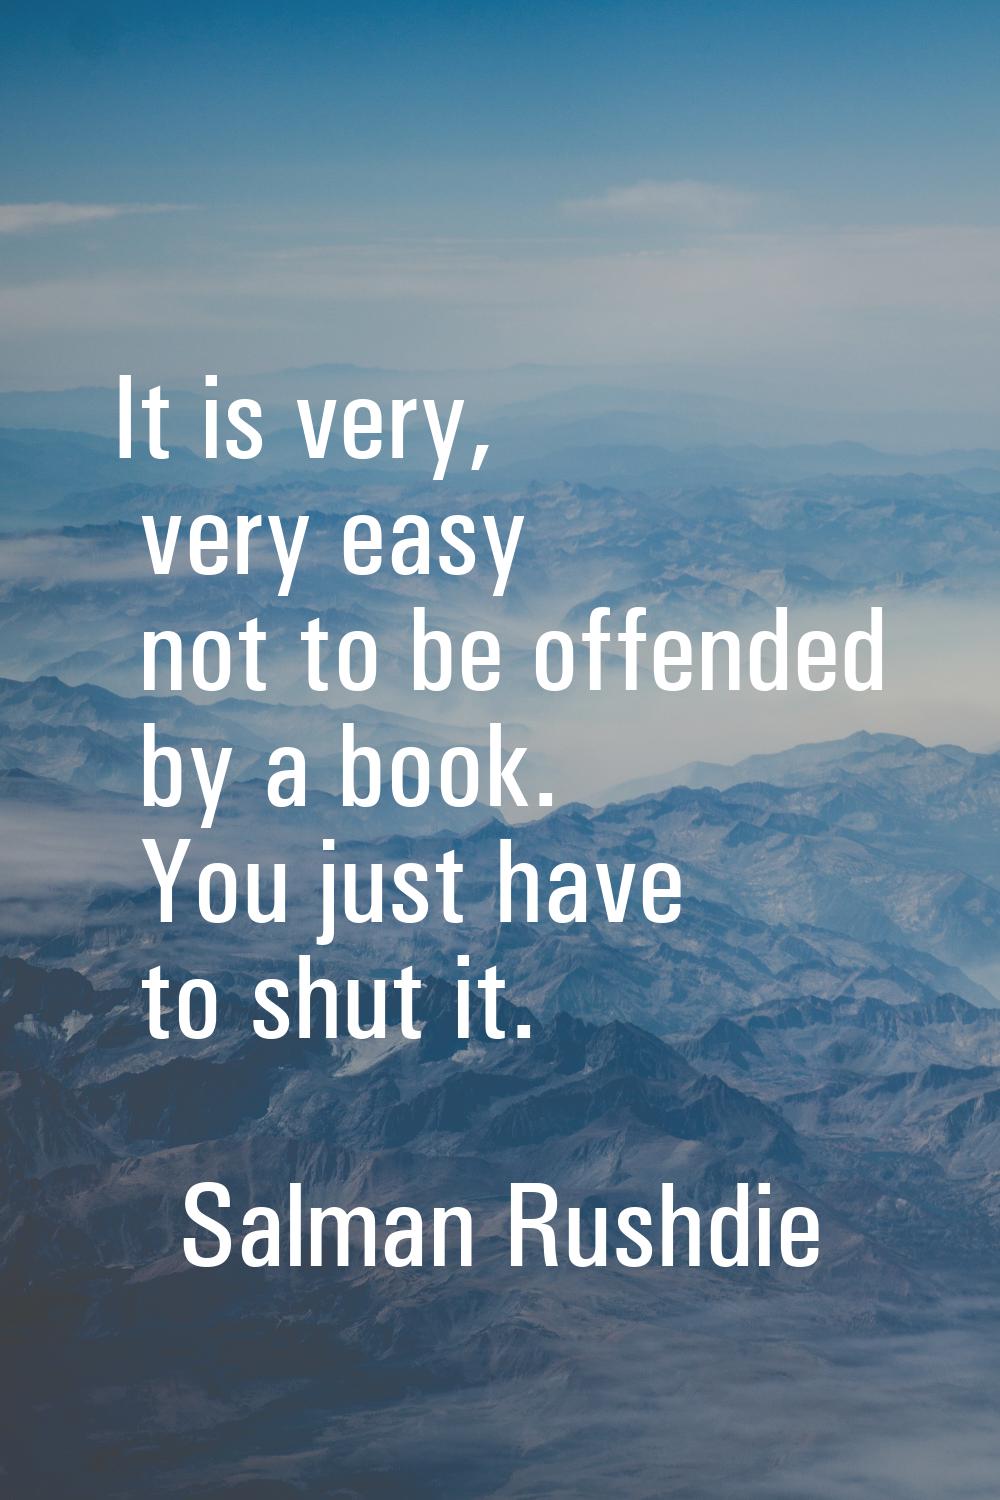 It is very, very easy not to be offended by a book. You just have to shut it.